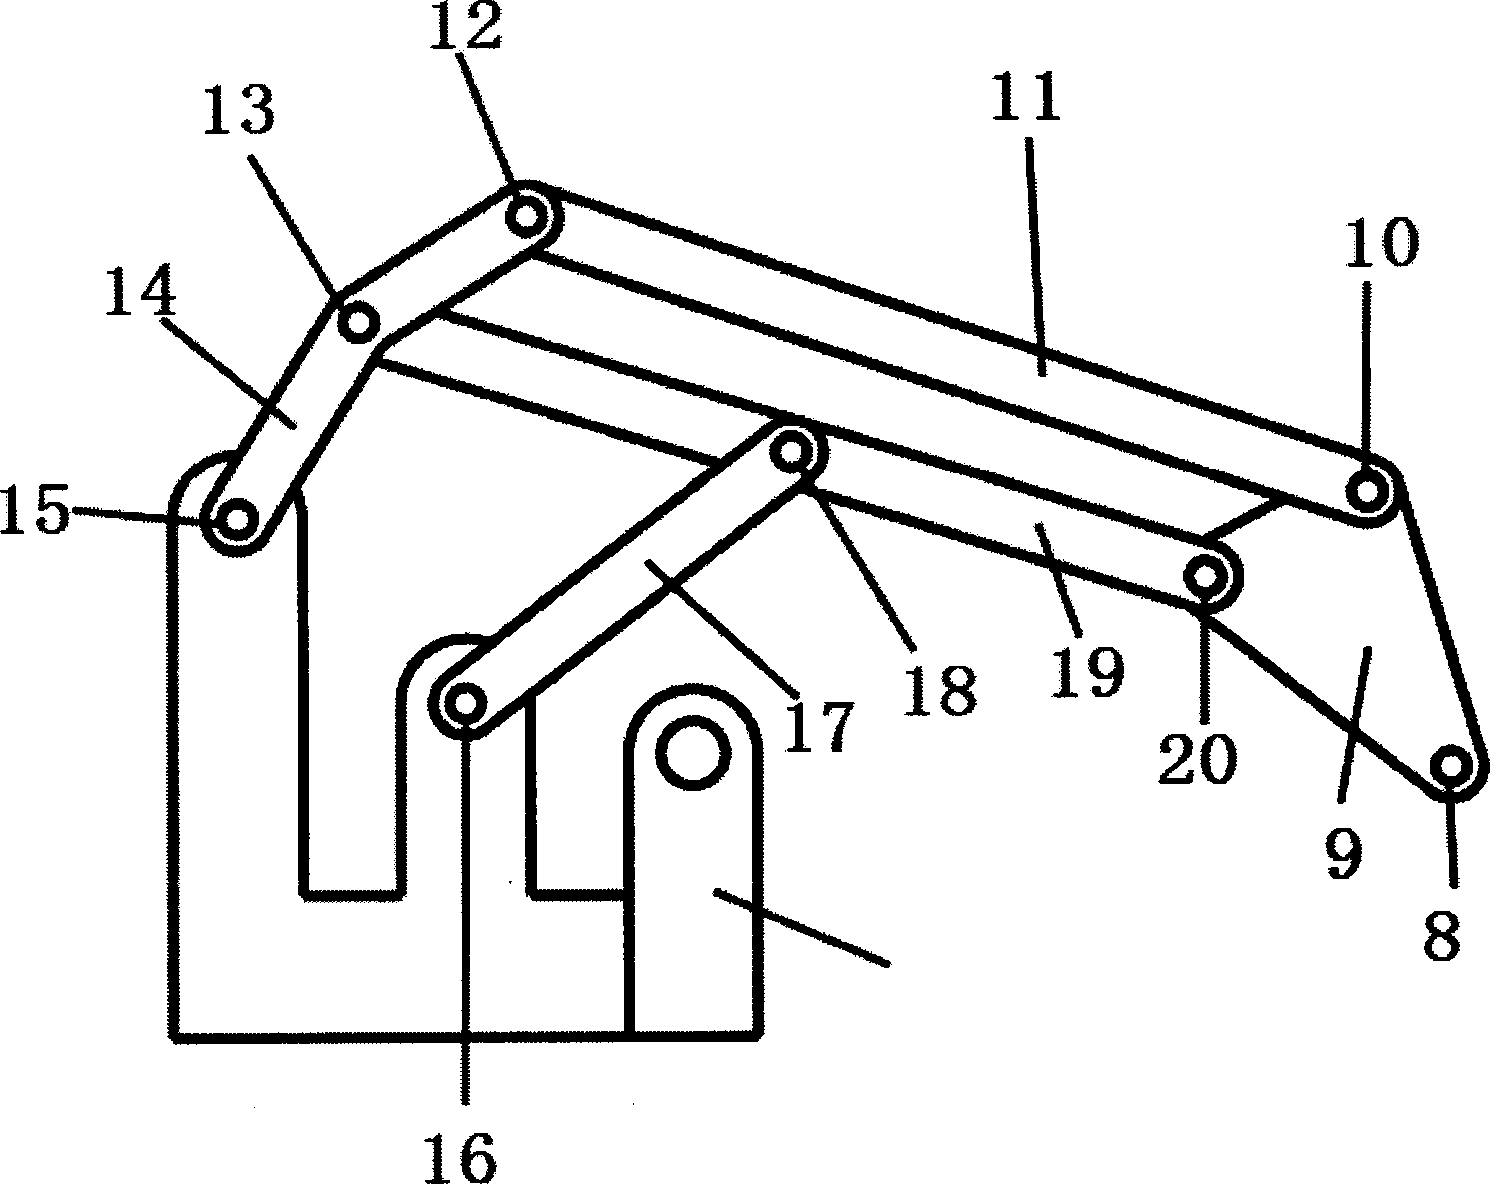 Two-DOF (degree of freedom) controllable mechanical loading mechanism